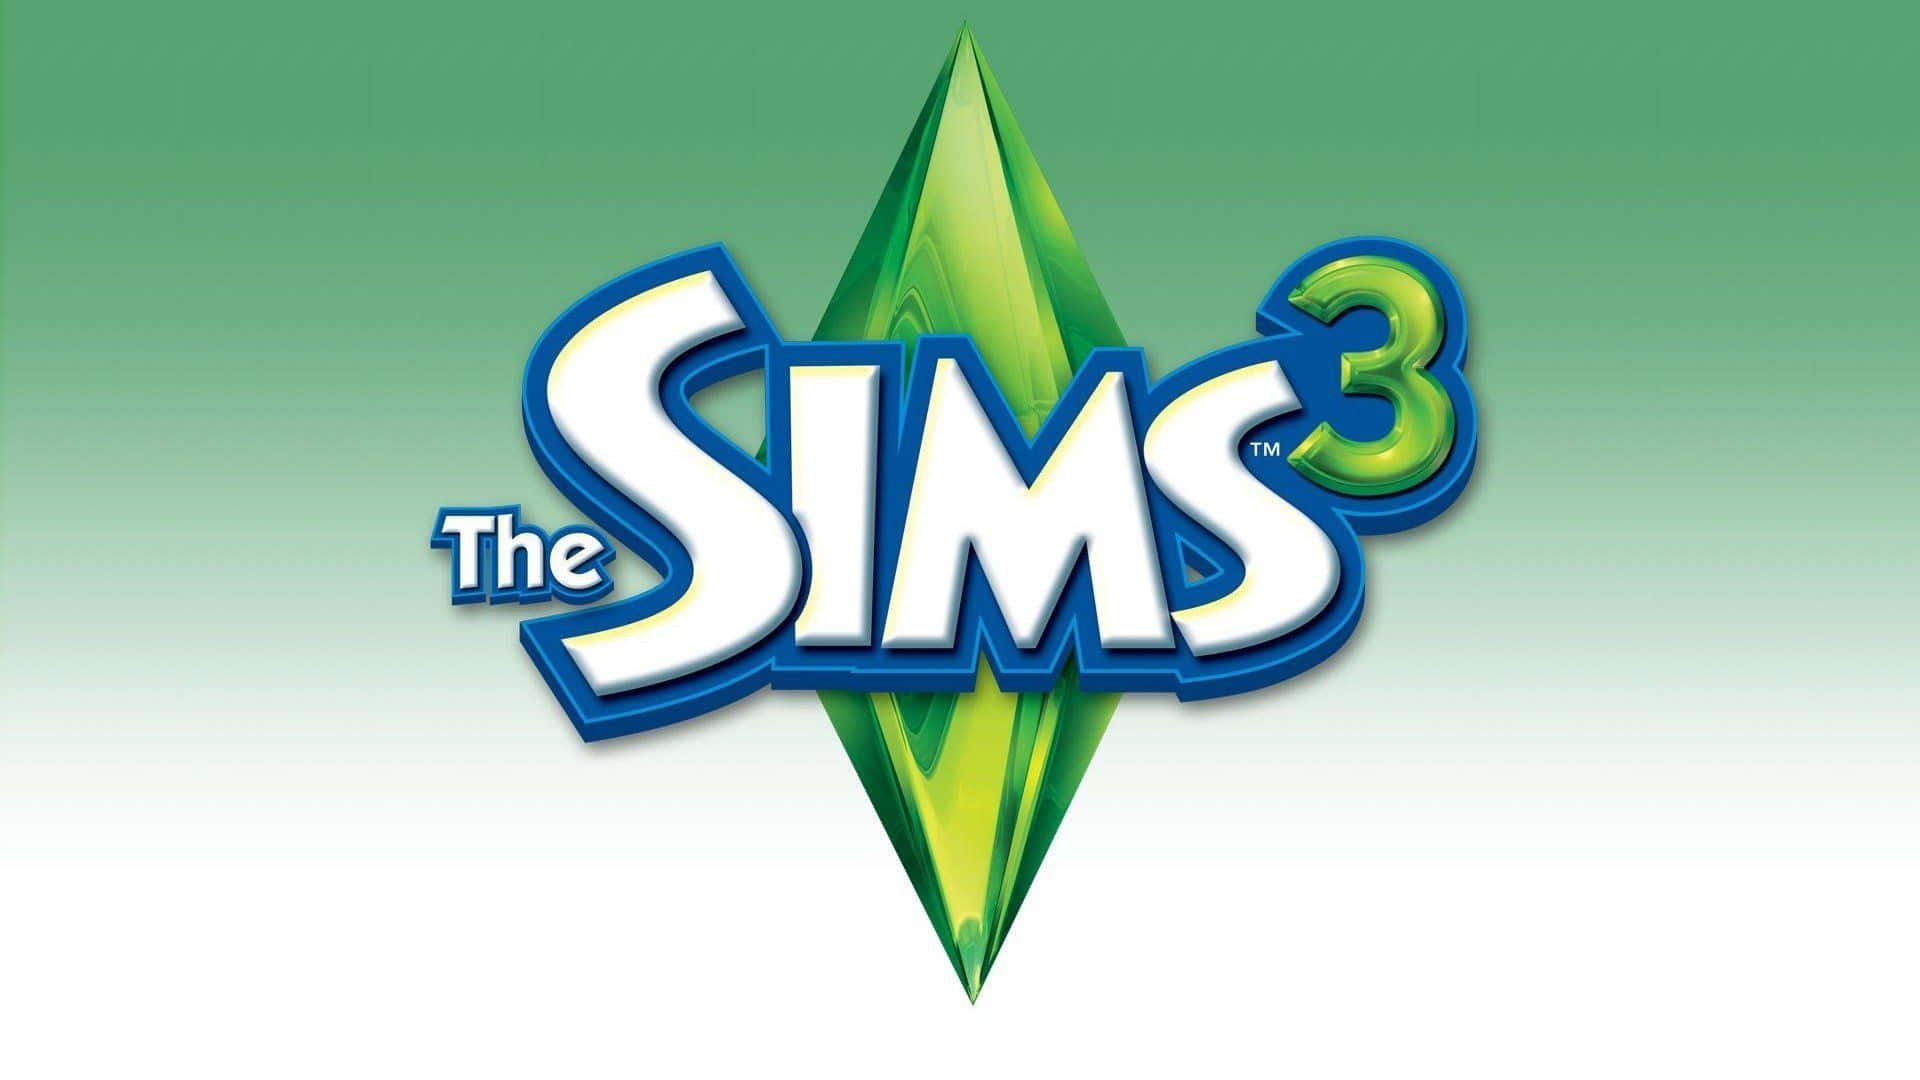 The Sims 3 Pictures Wallpaper